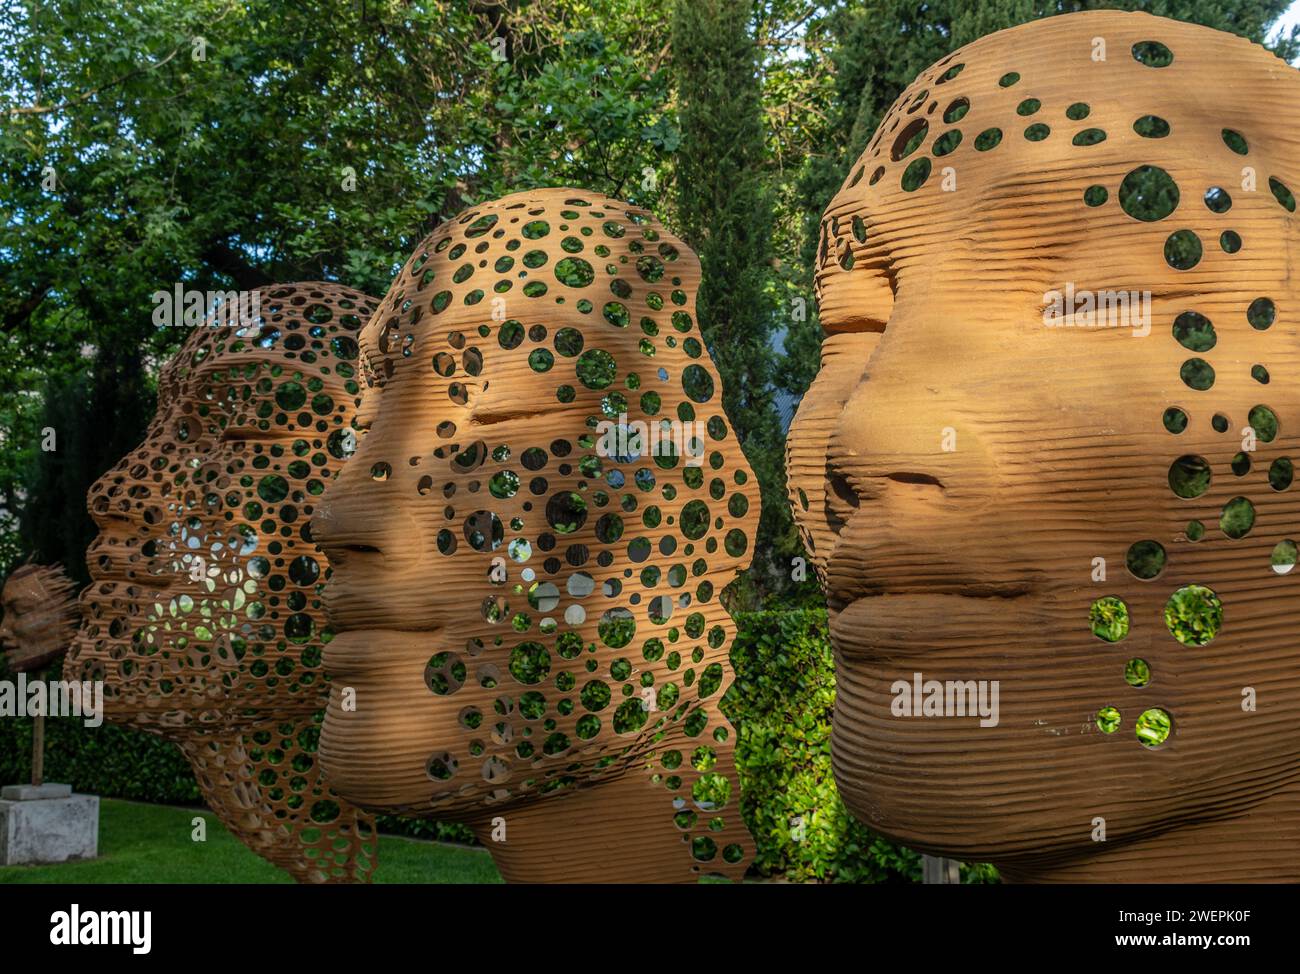 Some outdoor sculptures amidst lush greenery and trees Stock Photo